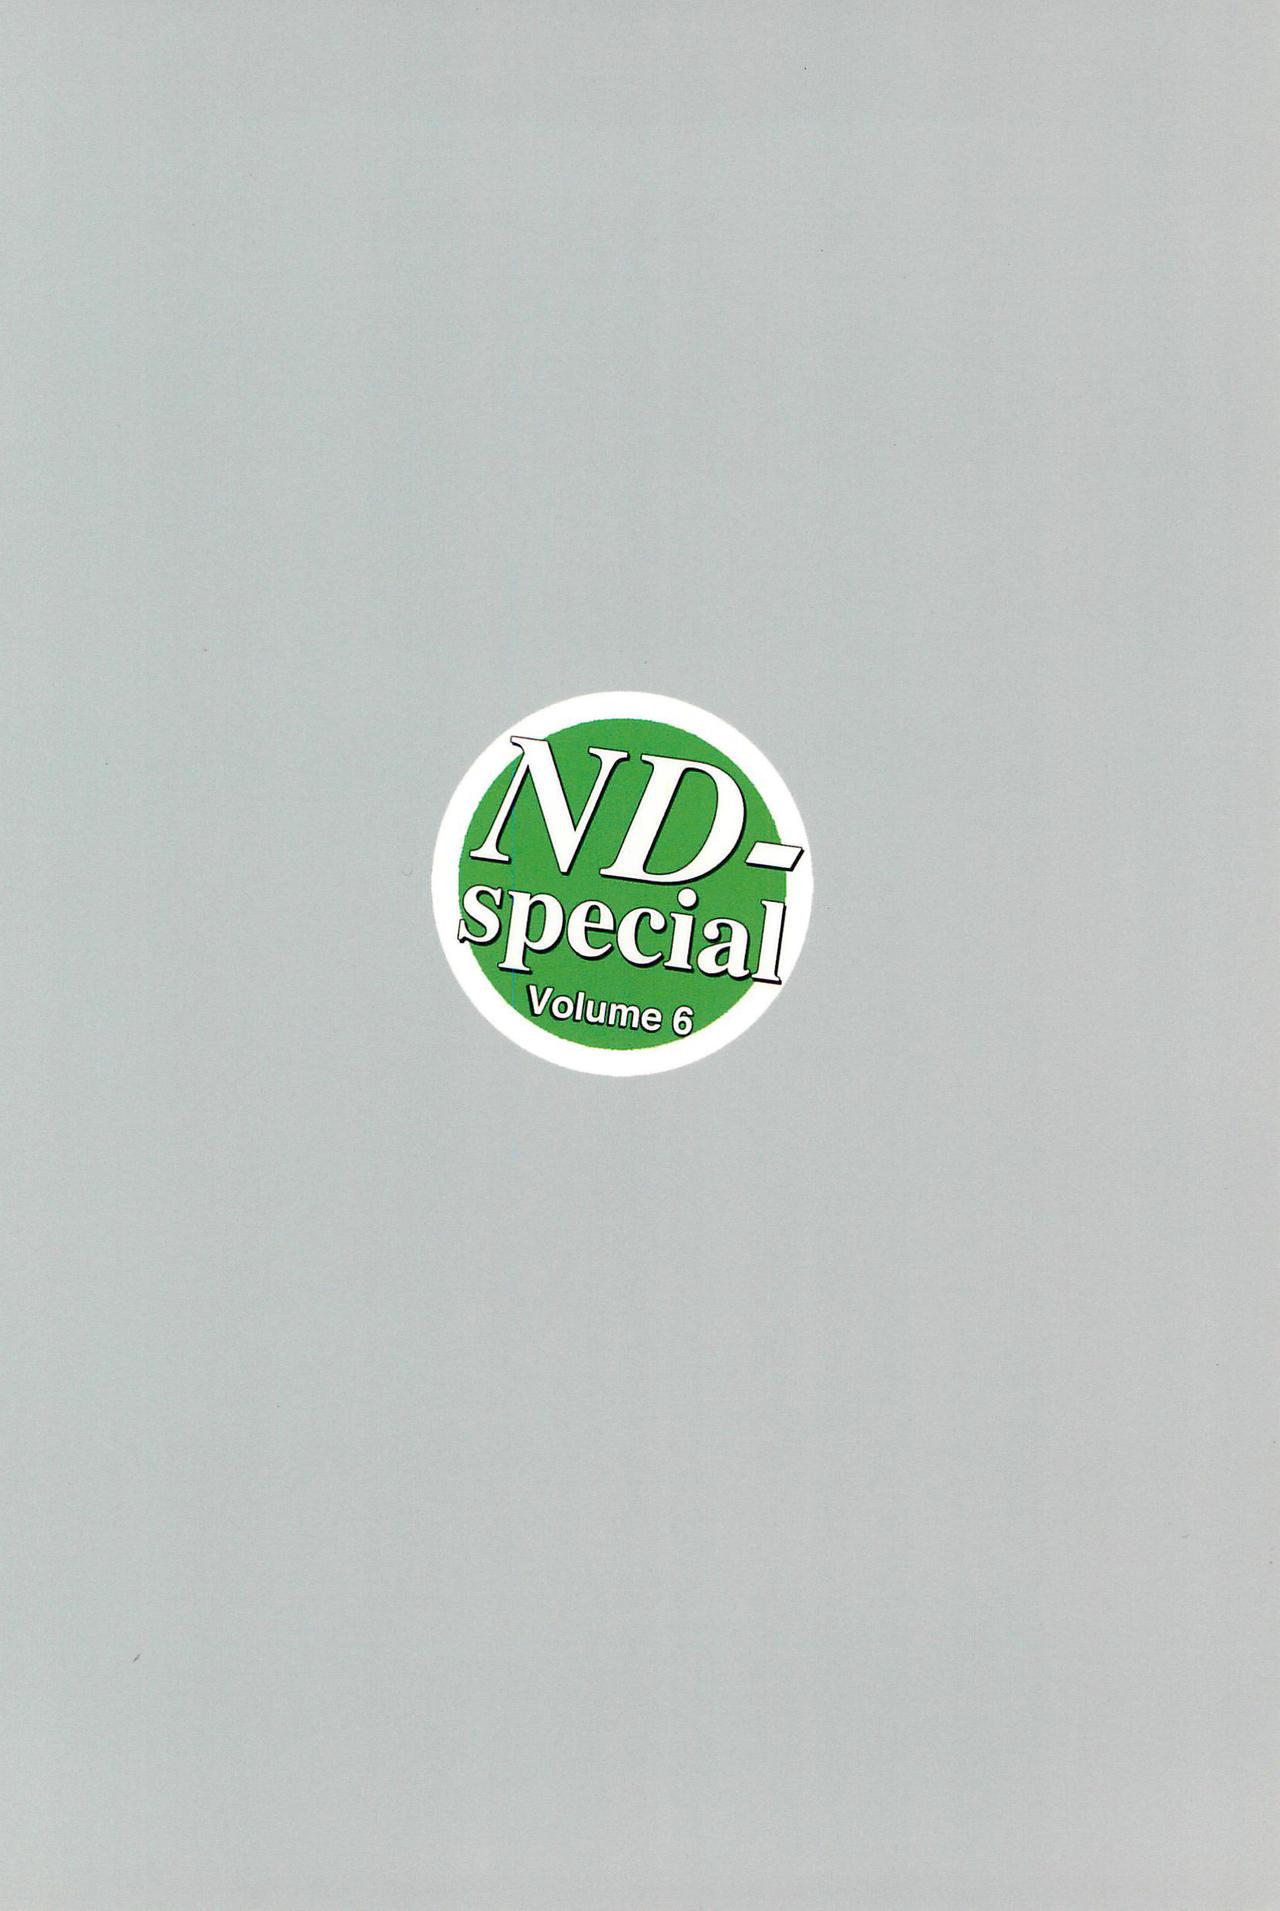 ND-special Volume 6 123